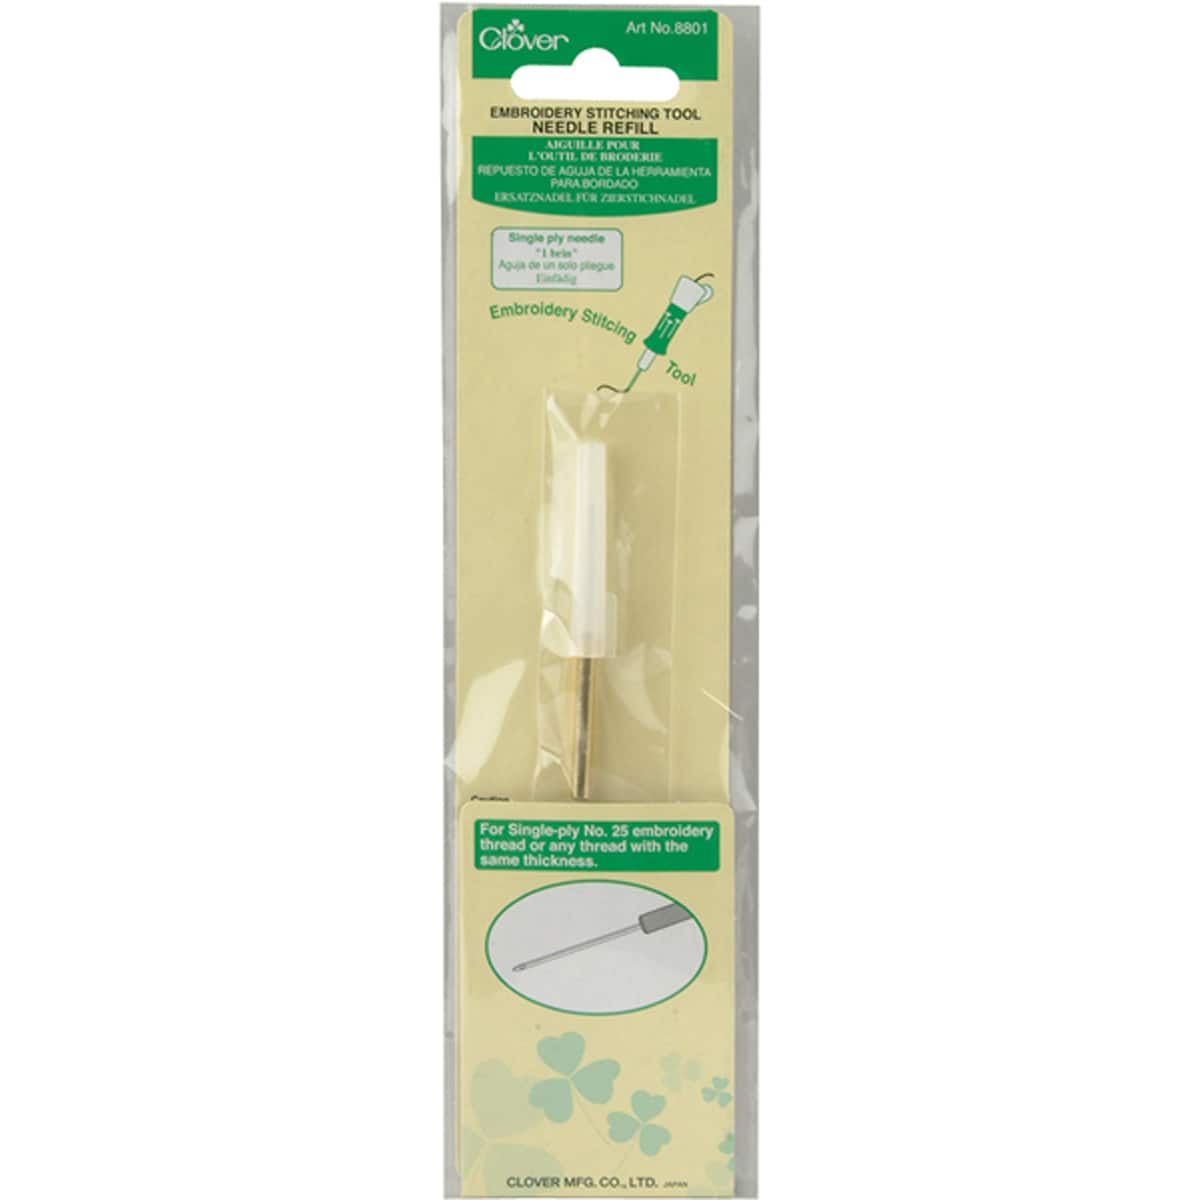 Clover Embroidery Stitching Tool Needle Refill-Single Ply 